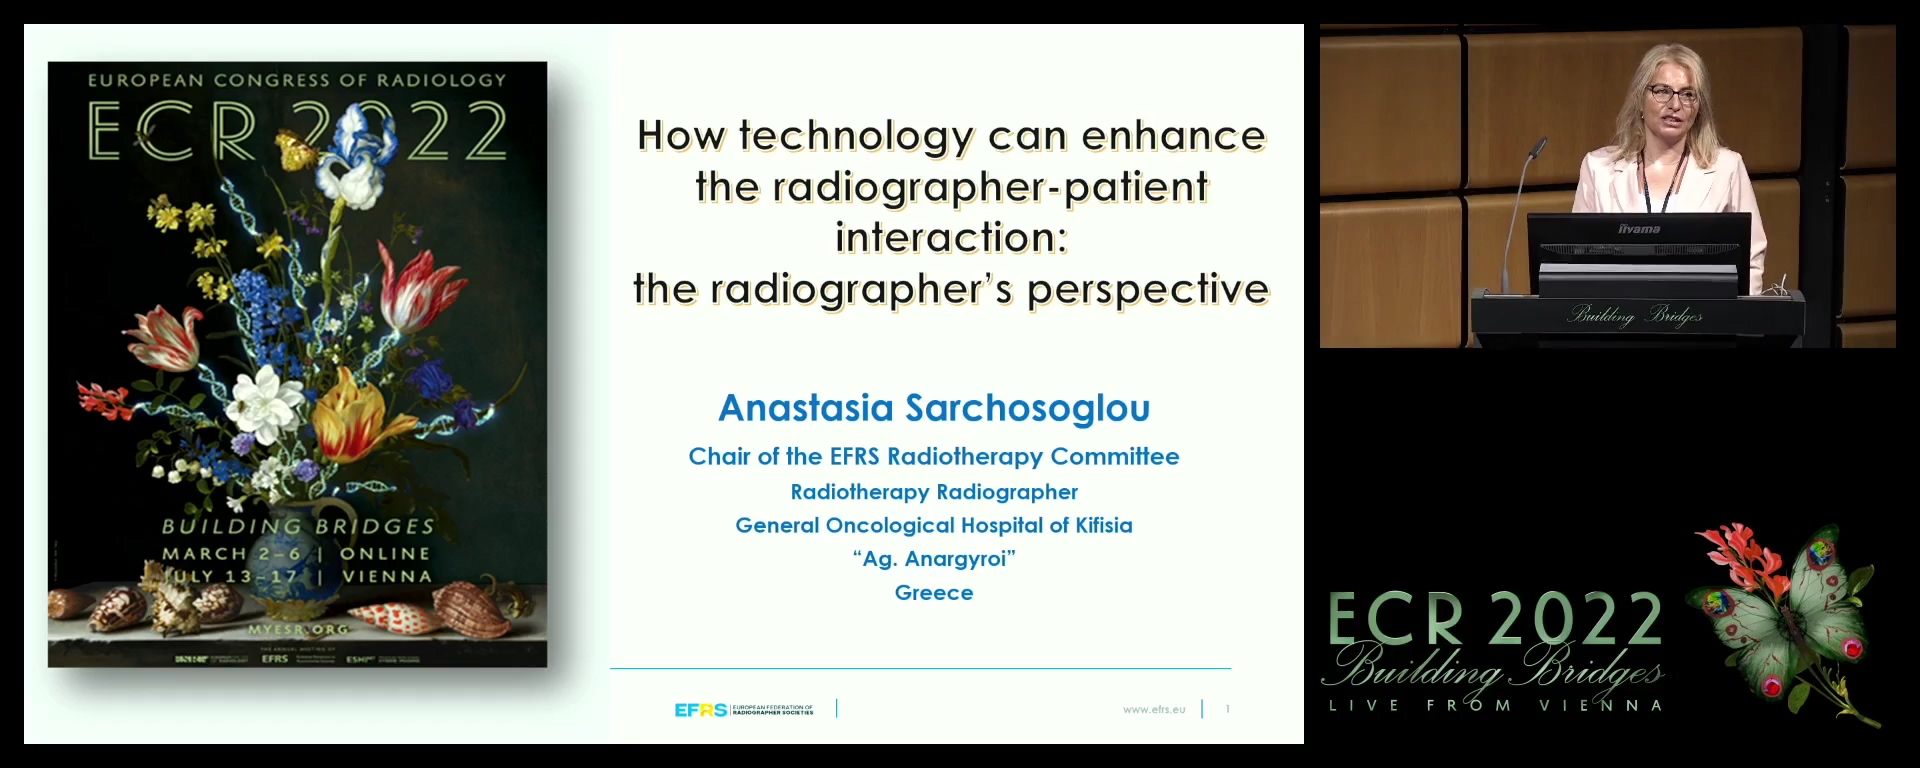 How technology can enhance the radiographer-patient interaction: the radiographer's perspective - Anastasia Sarchosoglou, Athens / GR